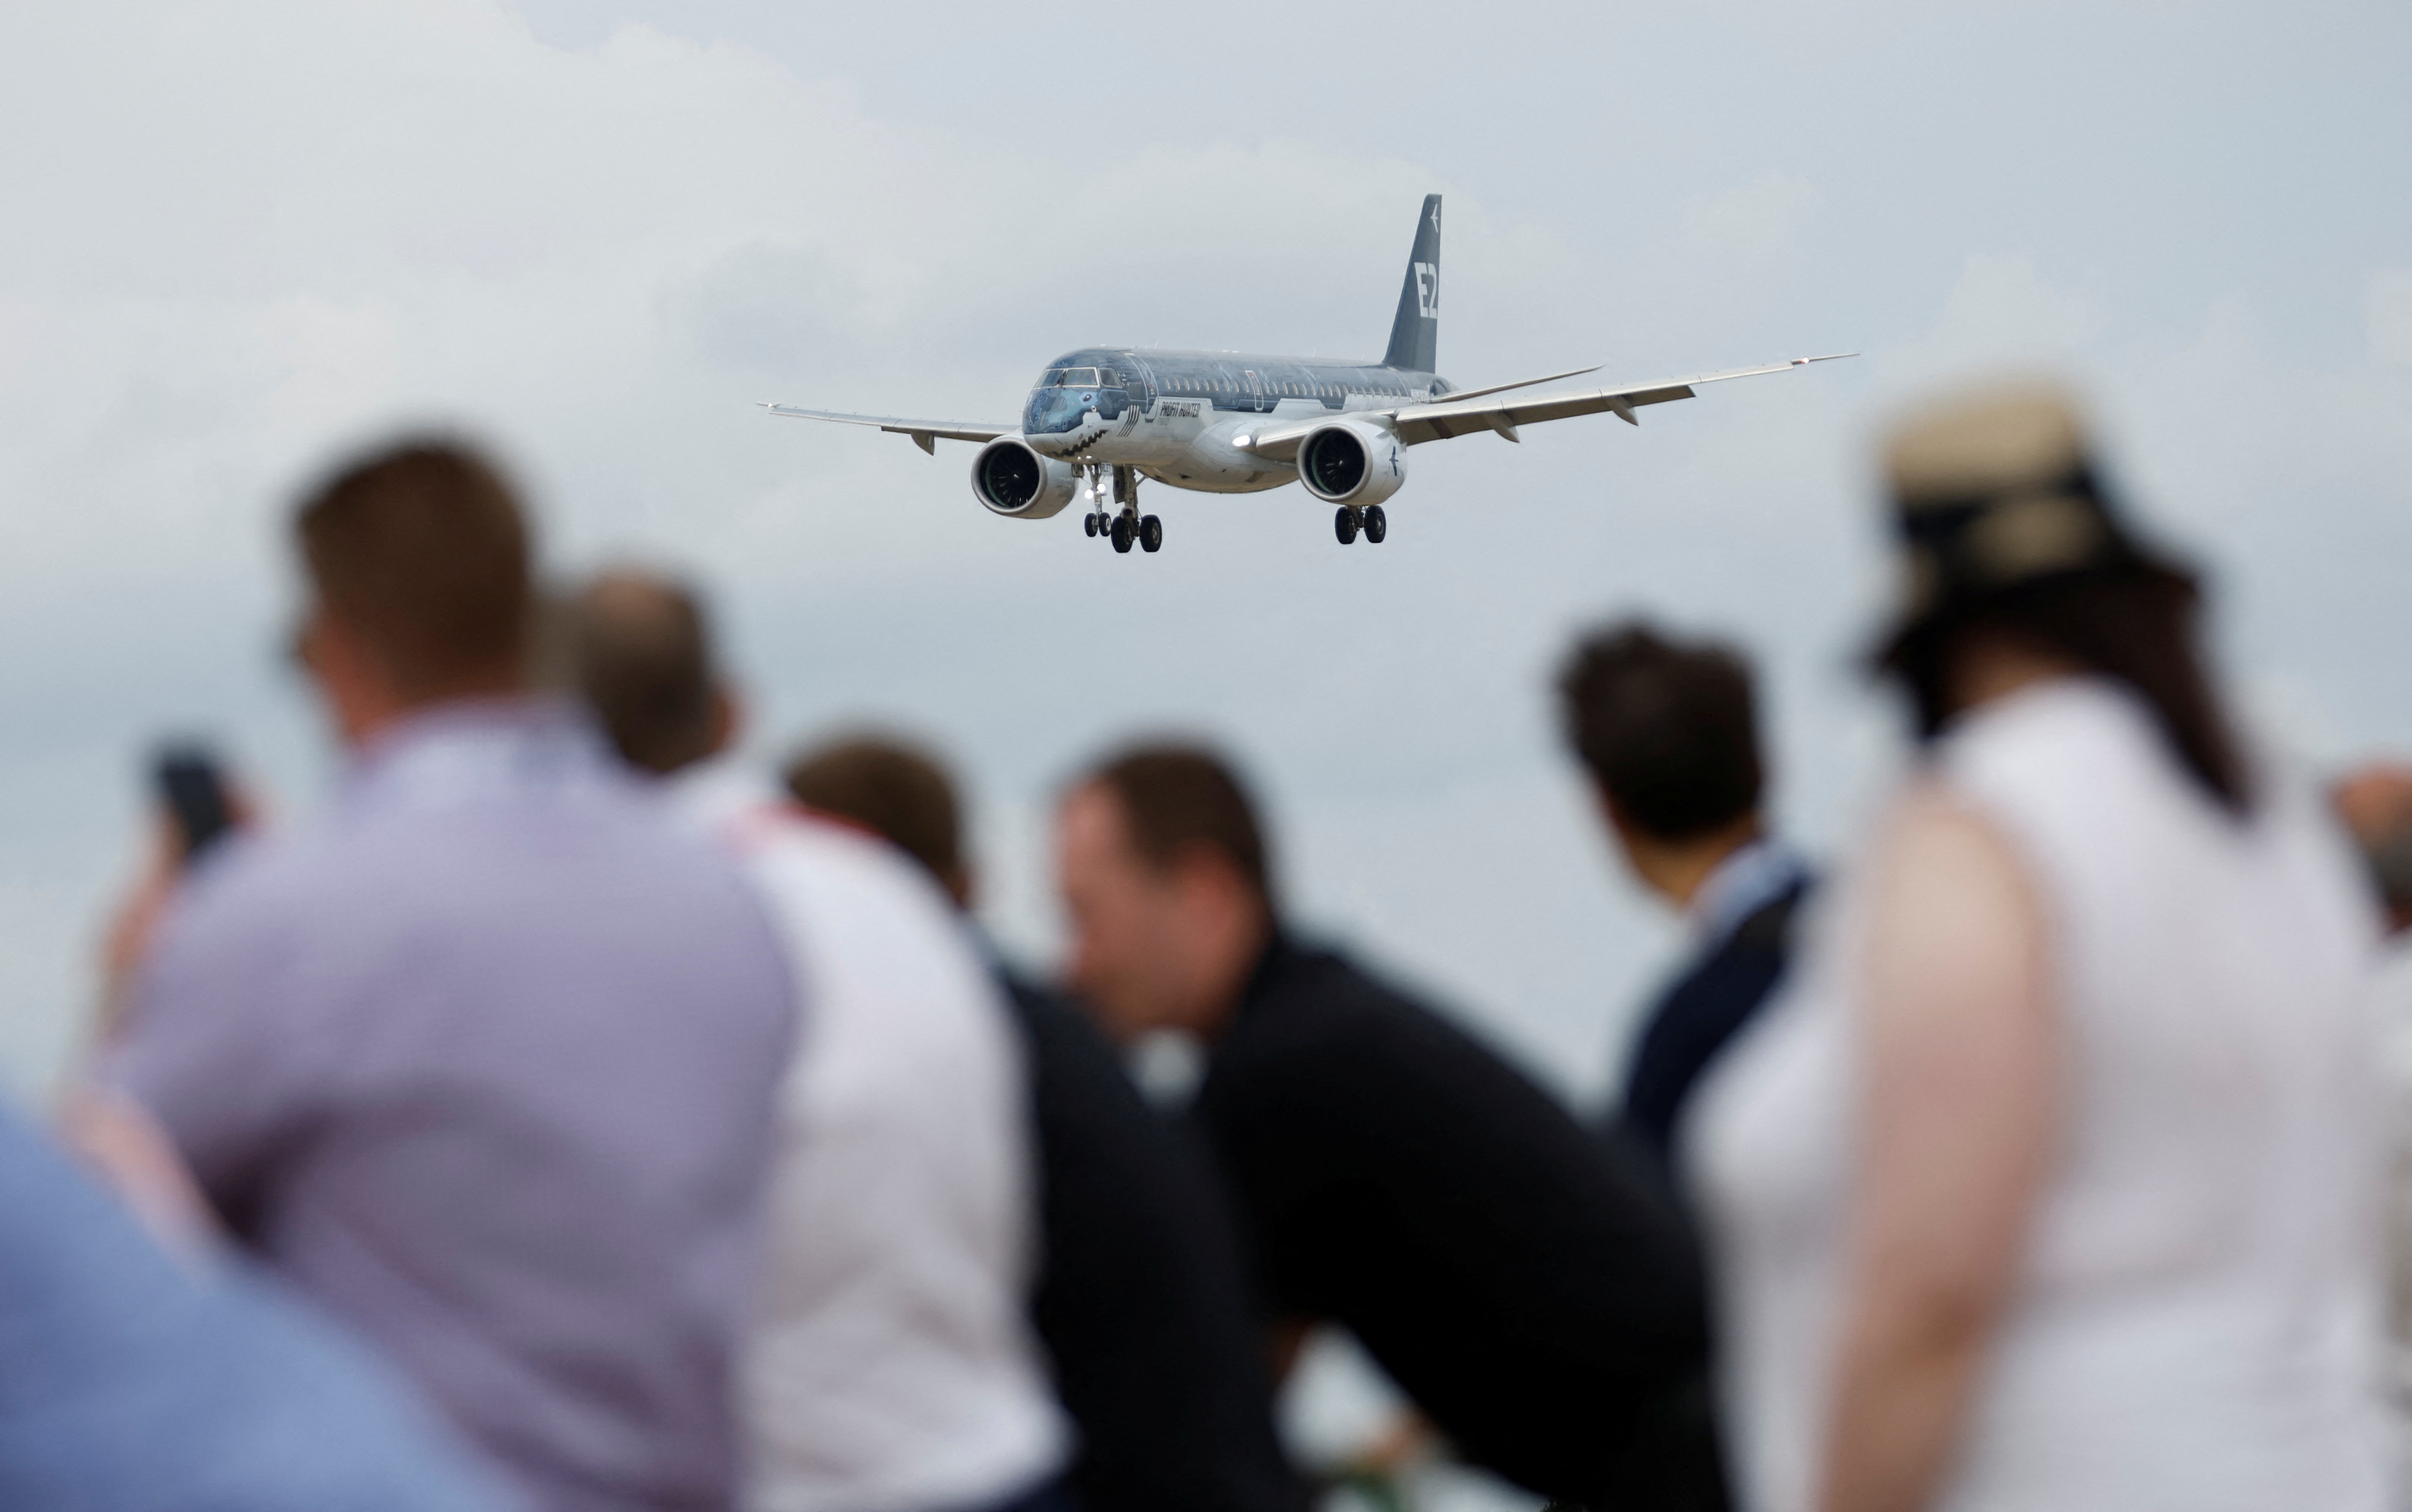 Attendees watch a Embraer 190 aircraft during a display at the Farnborough International Airshow, in Farnborough